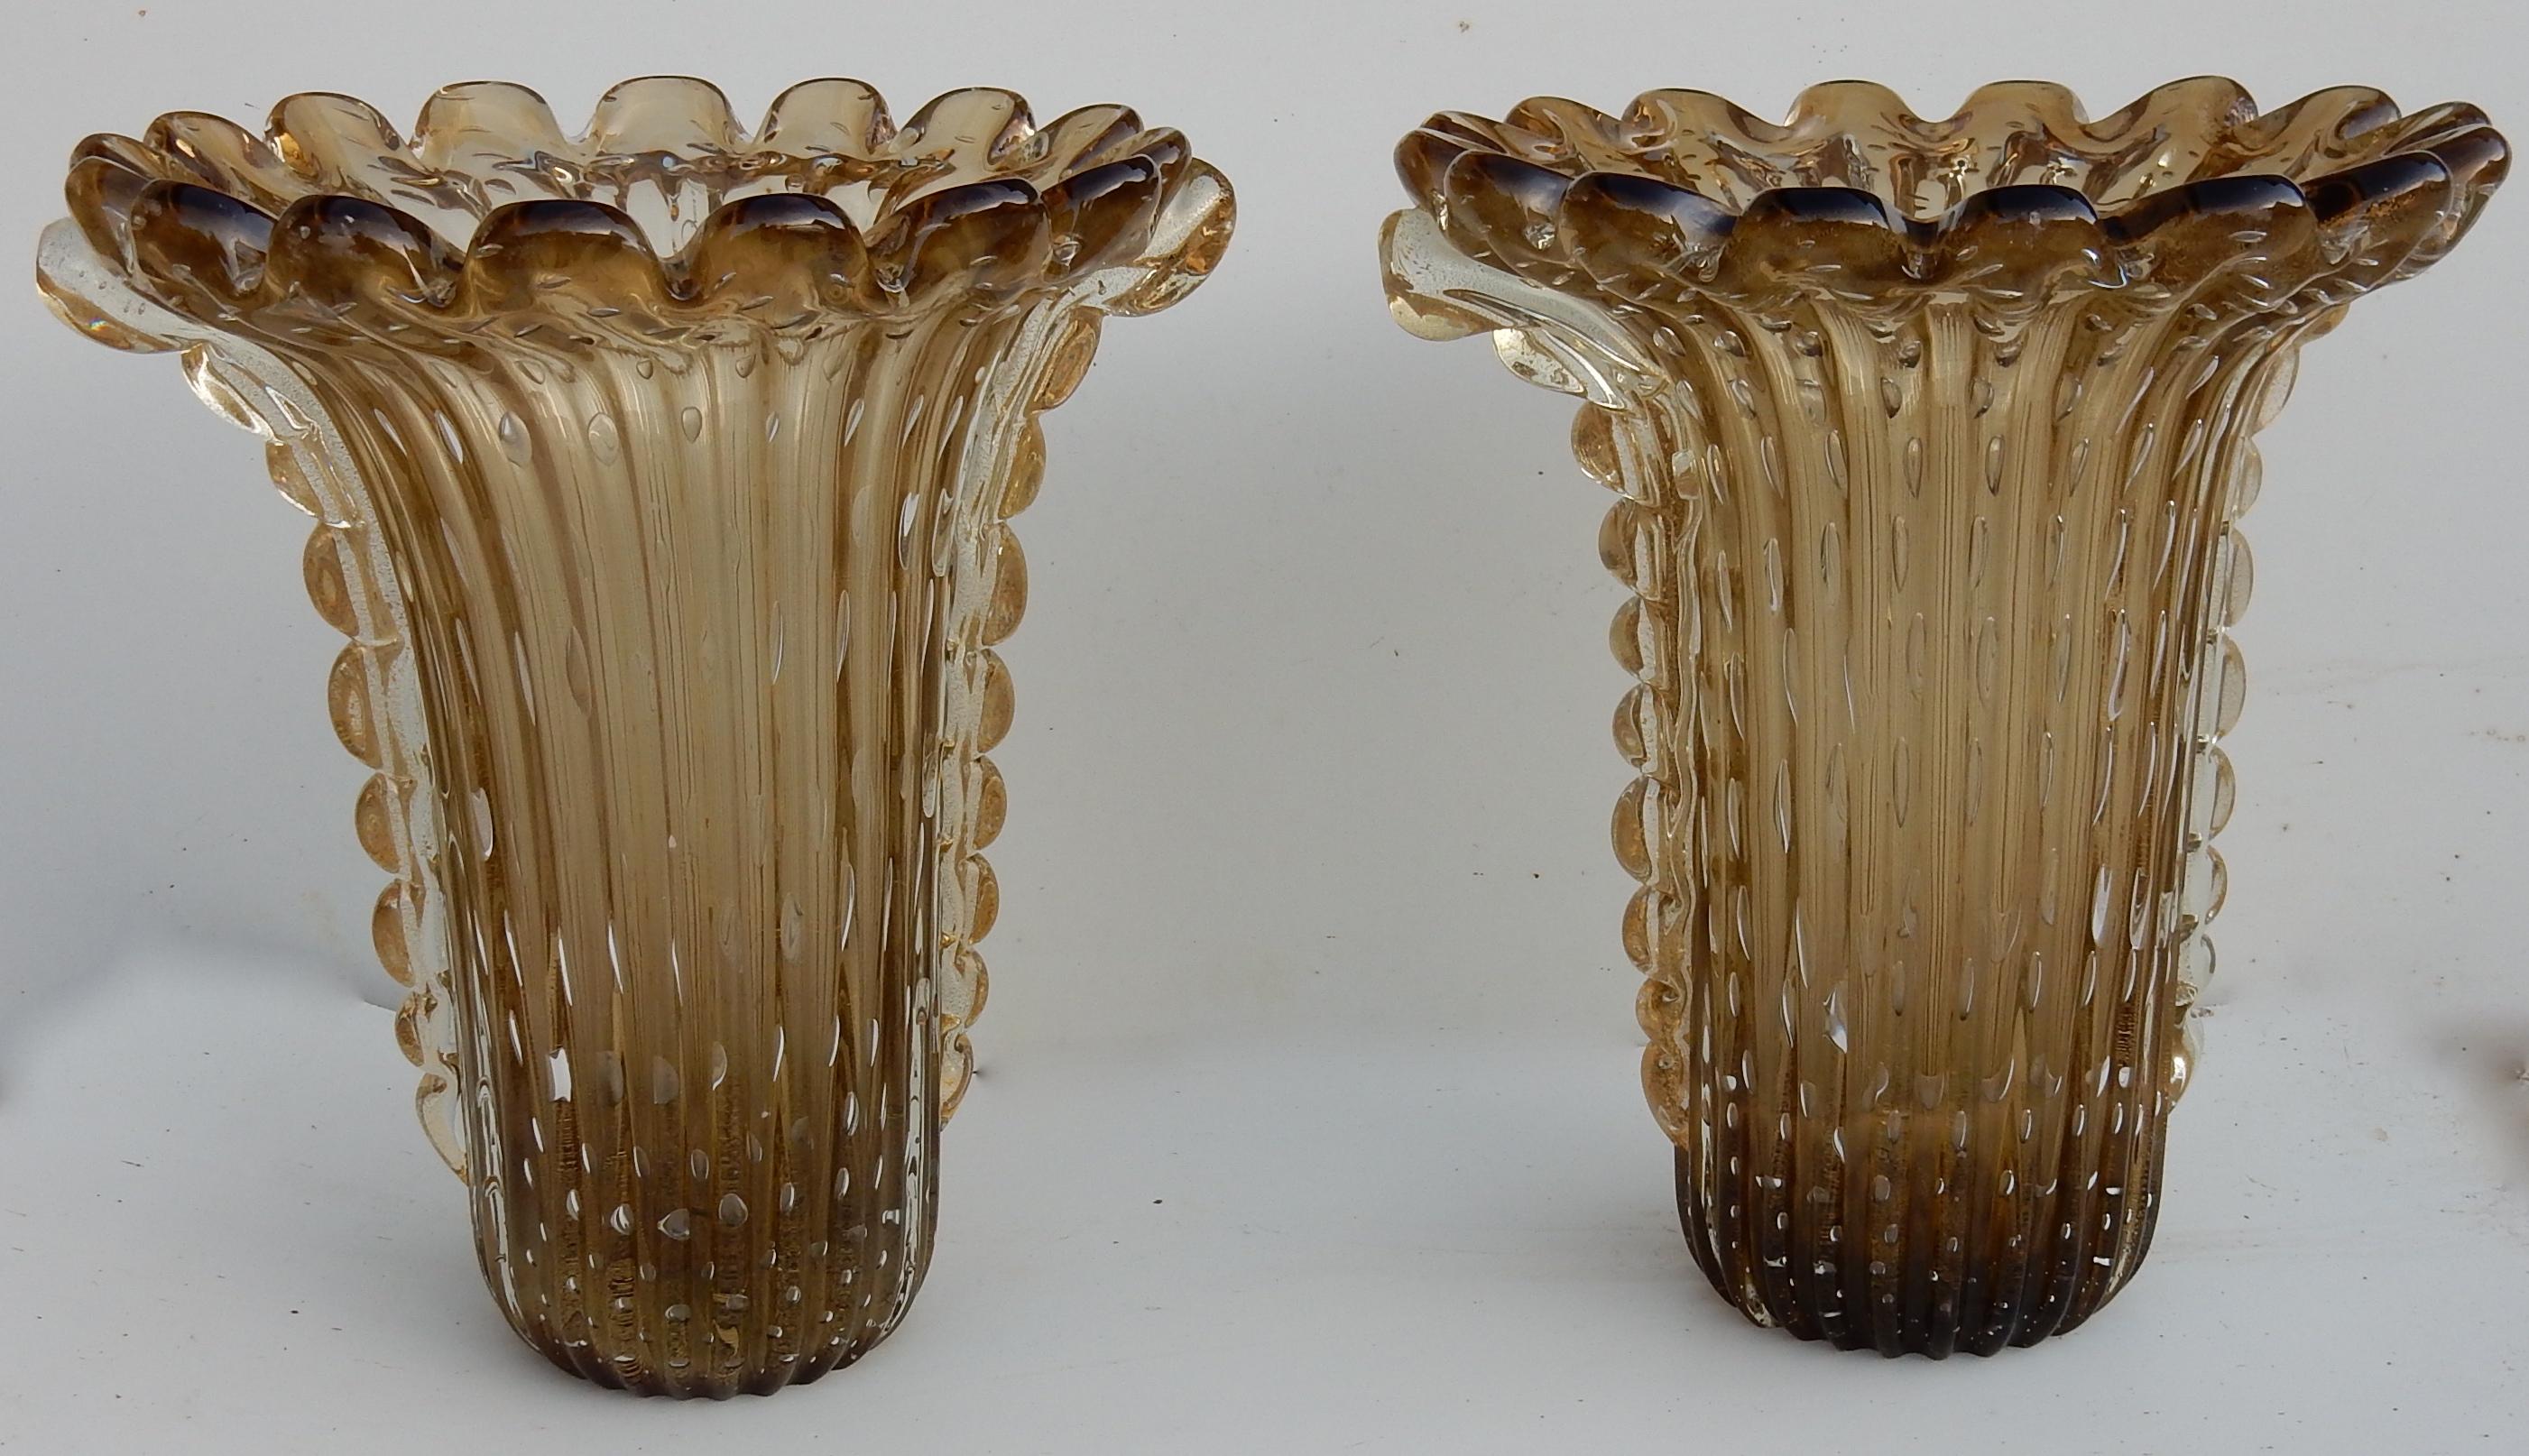 Pair of vases of Murano with bubbles and inclusions of gold, amber glass, good condition, signed Toso Murano, circa 1970.